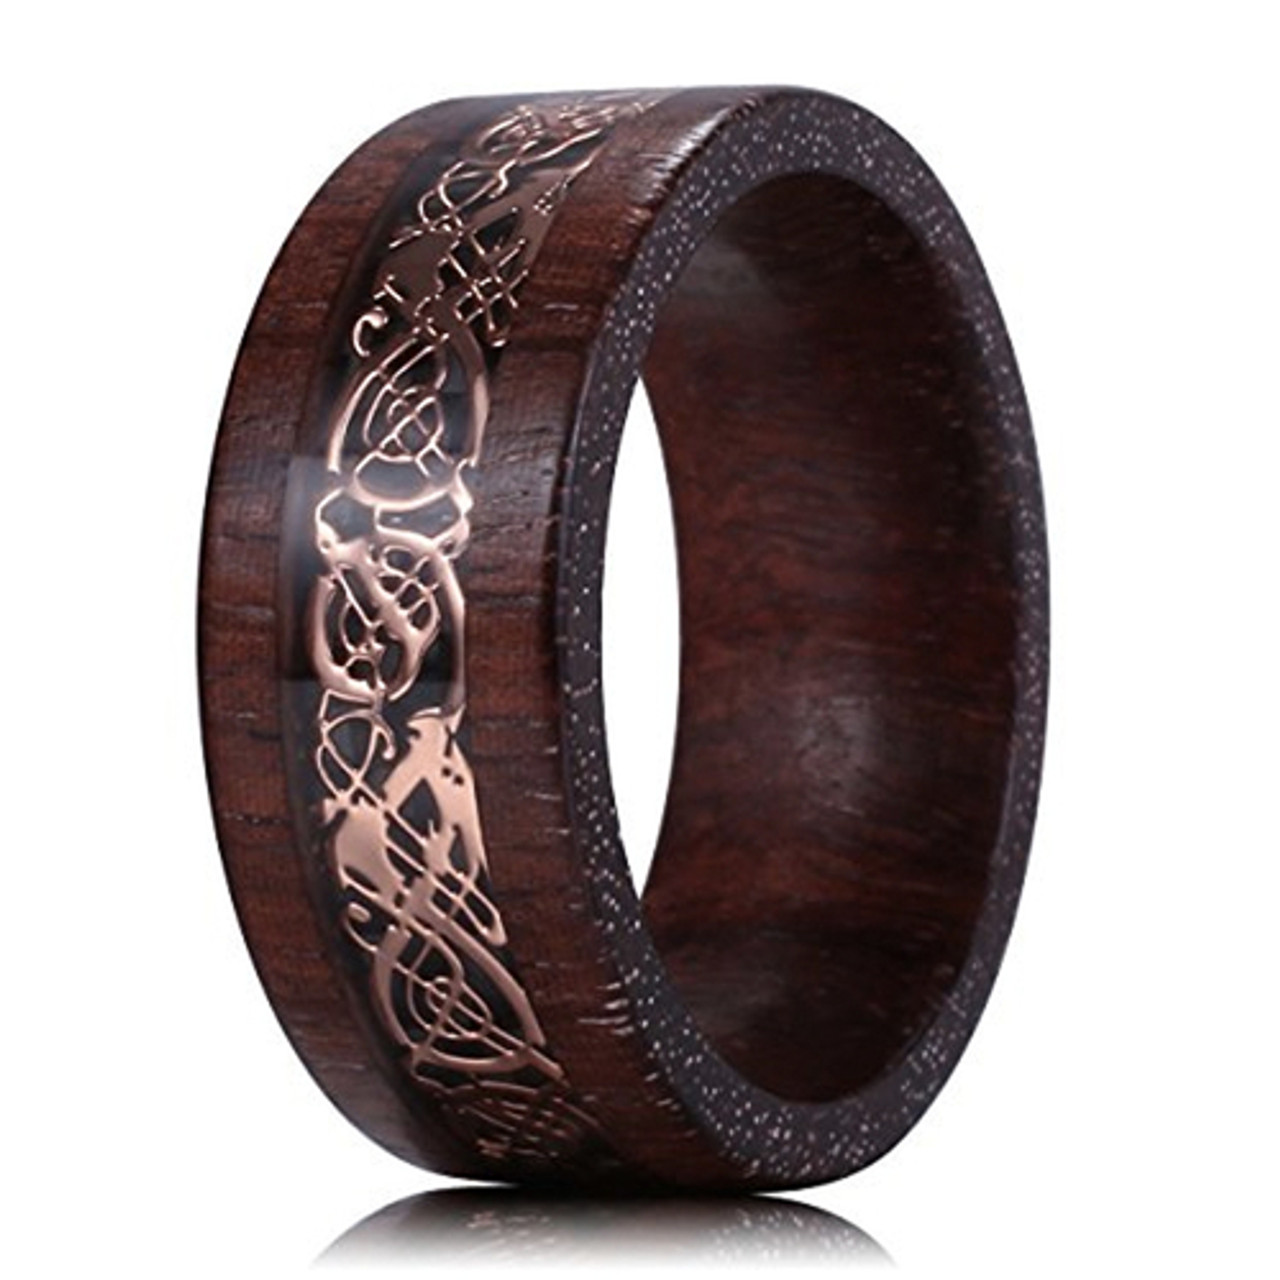 (8mm) Unisex or Men's Sandalwood Wedding Ring Band. Wooden Celtic Knot Ring with Rose Gold Resin Inlay.